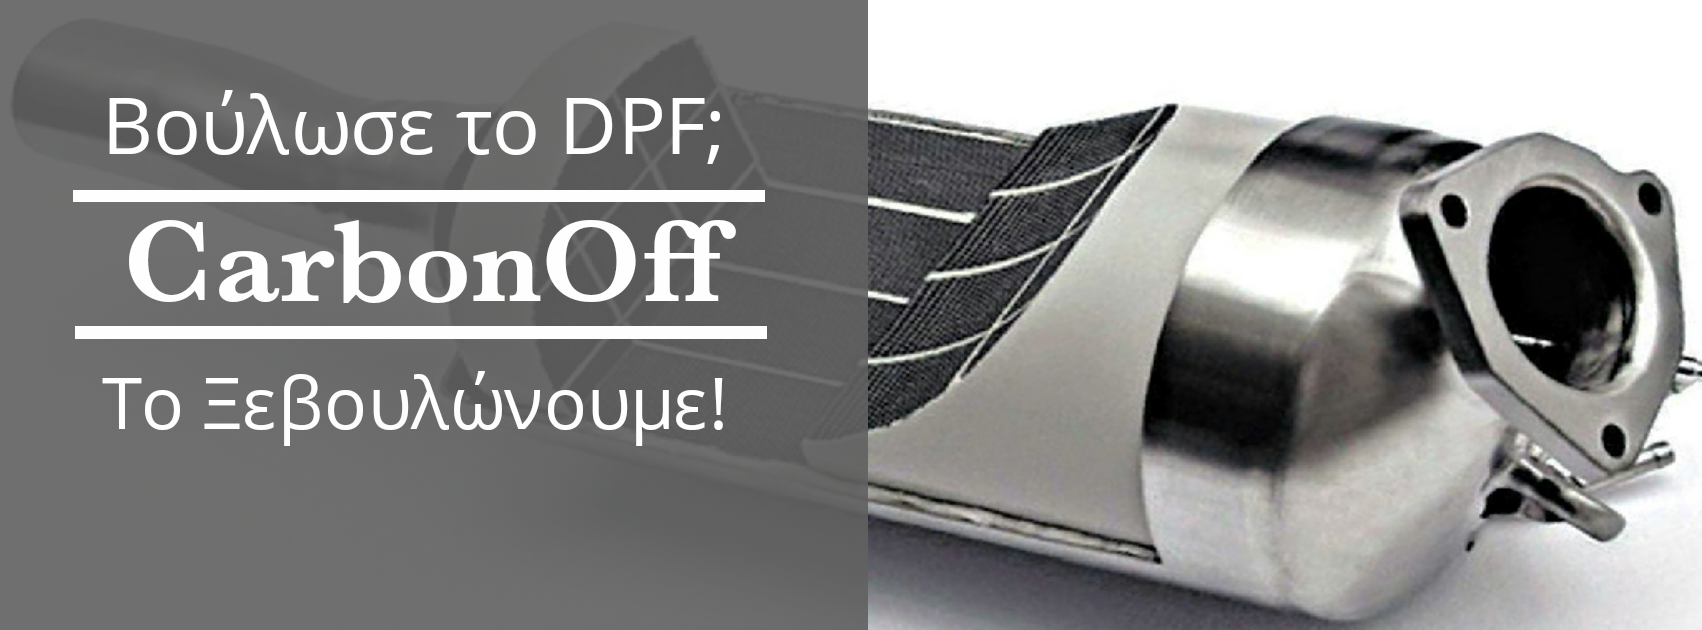 DPF CLEANING